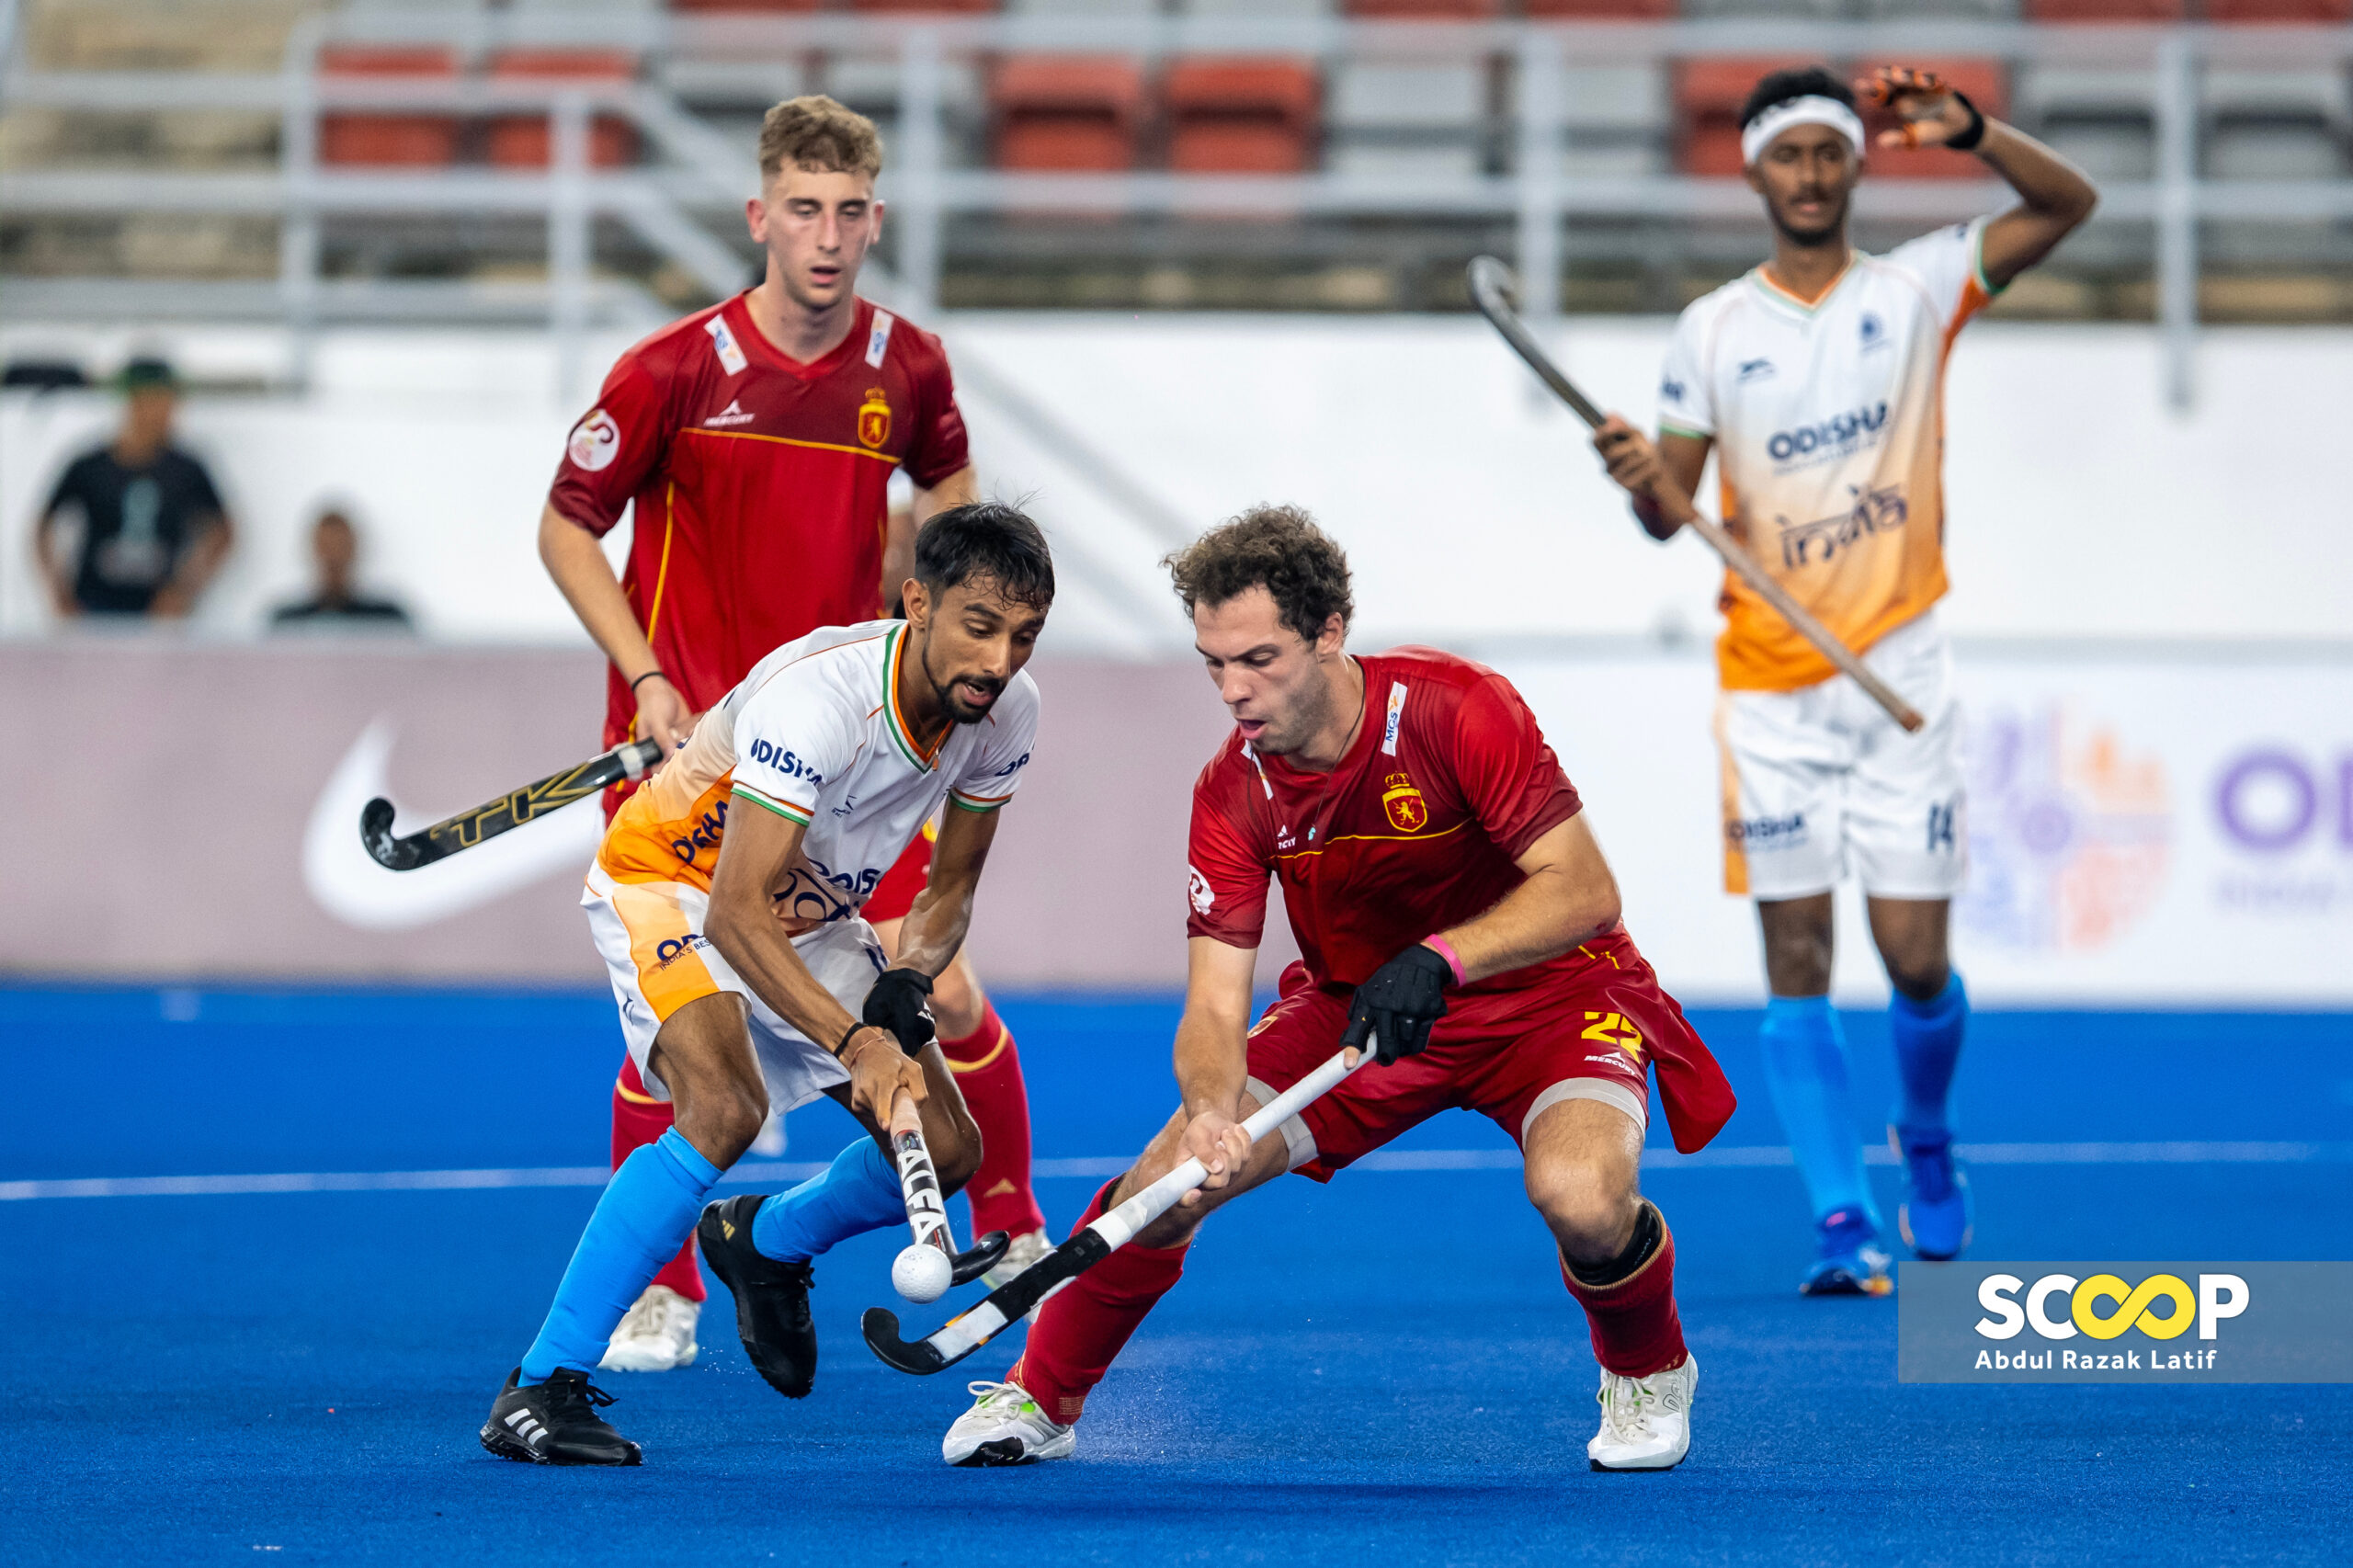 Junior World Cup: Spain trounce India 4-1 to secure quarter-finals spot